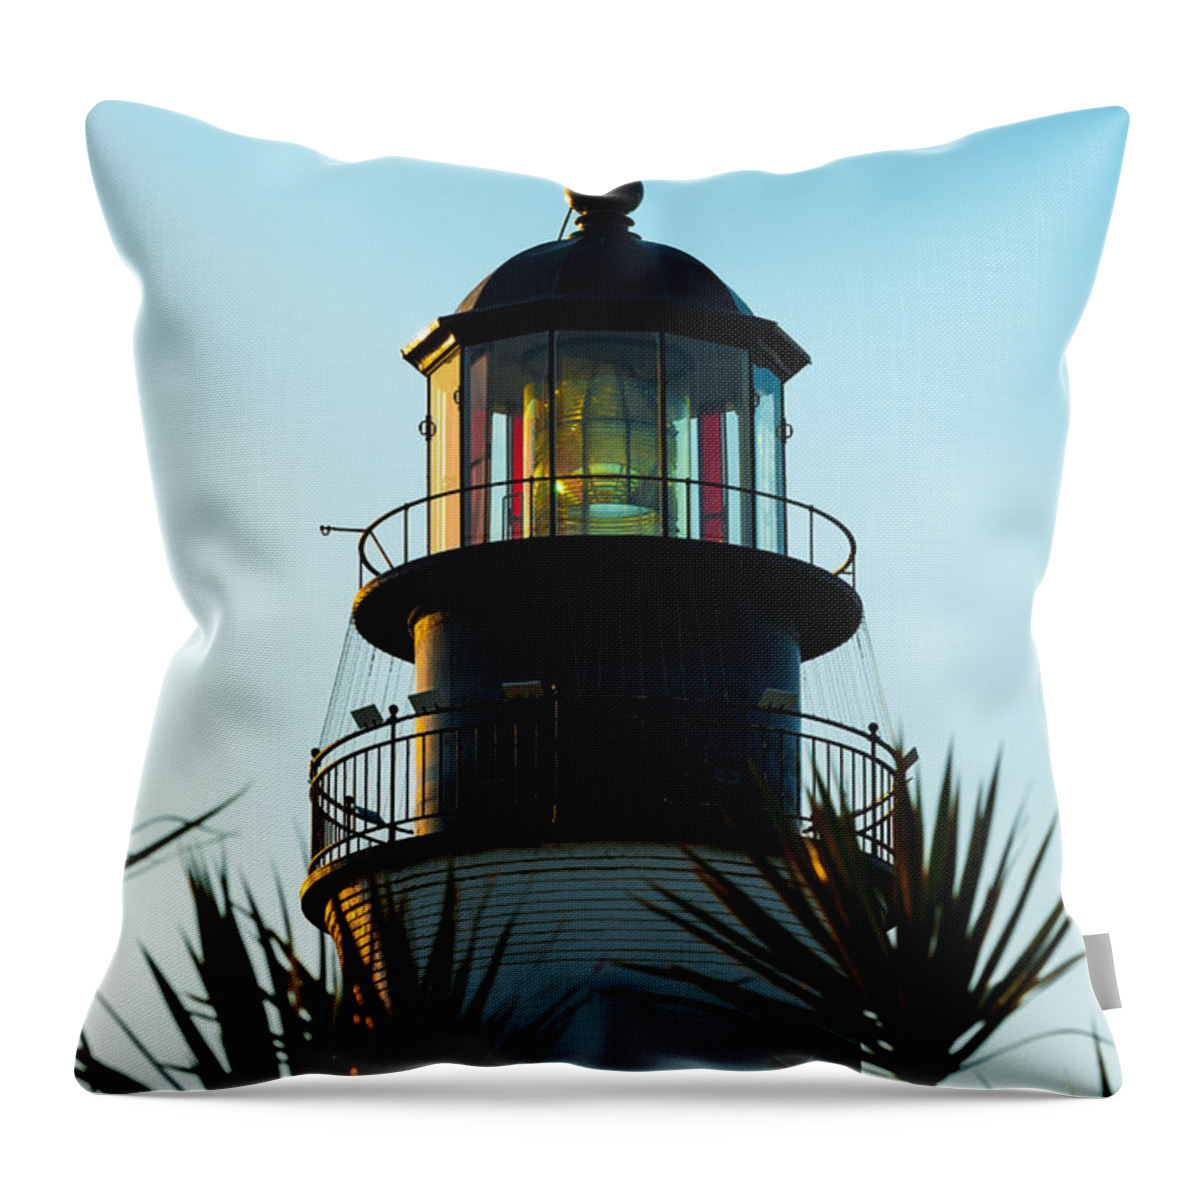 Aid To Navigation Throw Pillow featuring the photograph Key West Lighthouse by Ed Gleichman